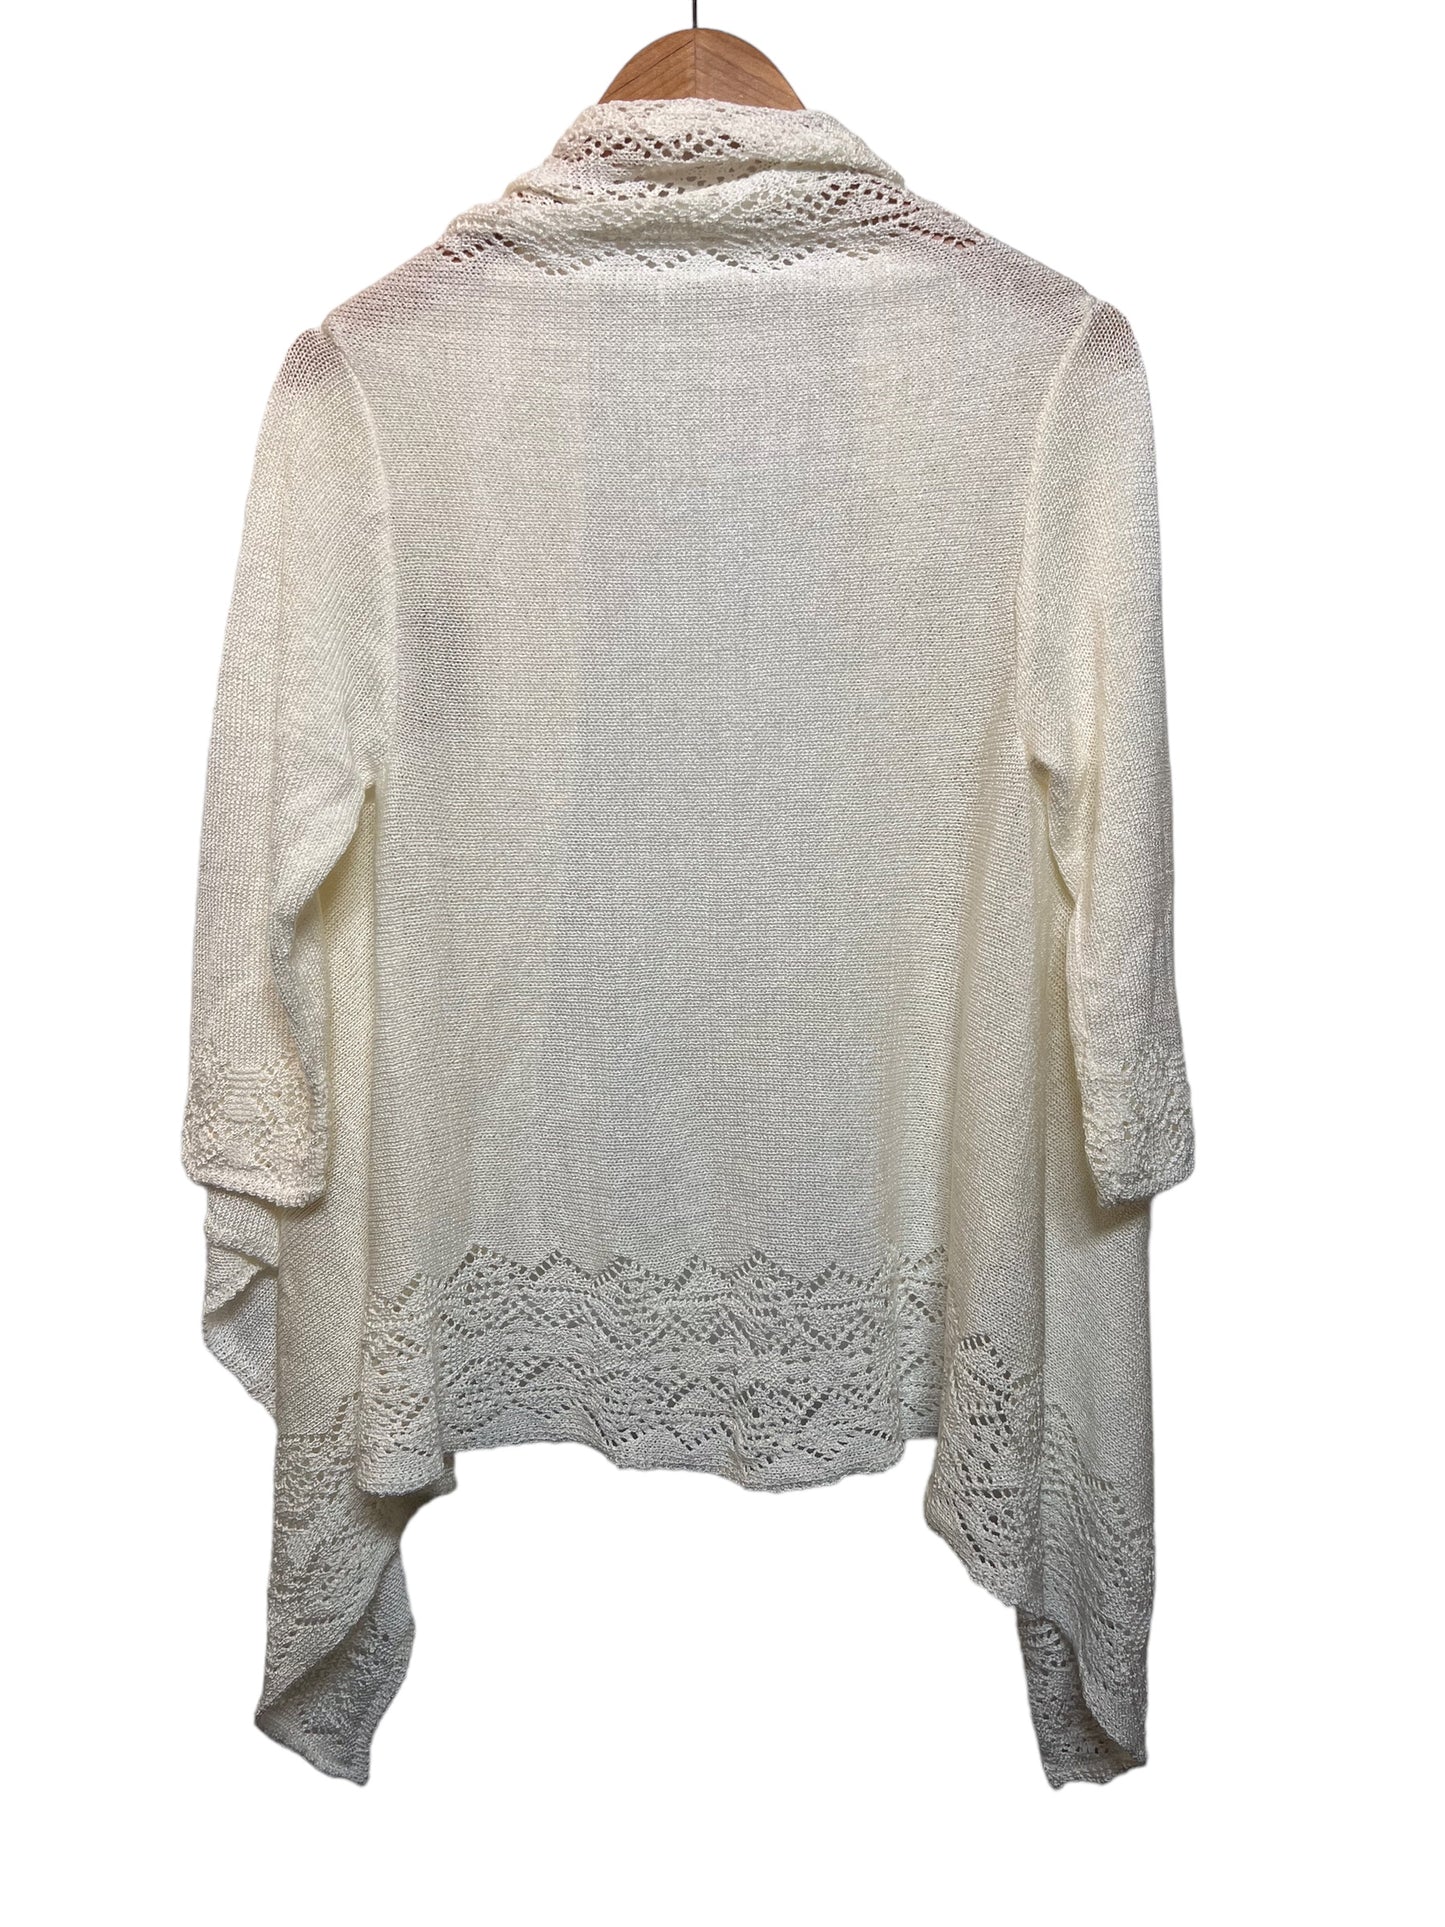 Women’s Knitted Open Cardigan (Size M)